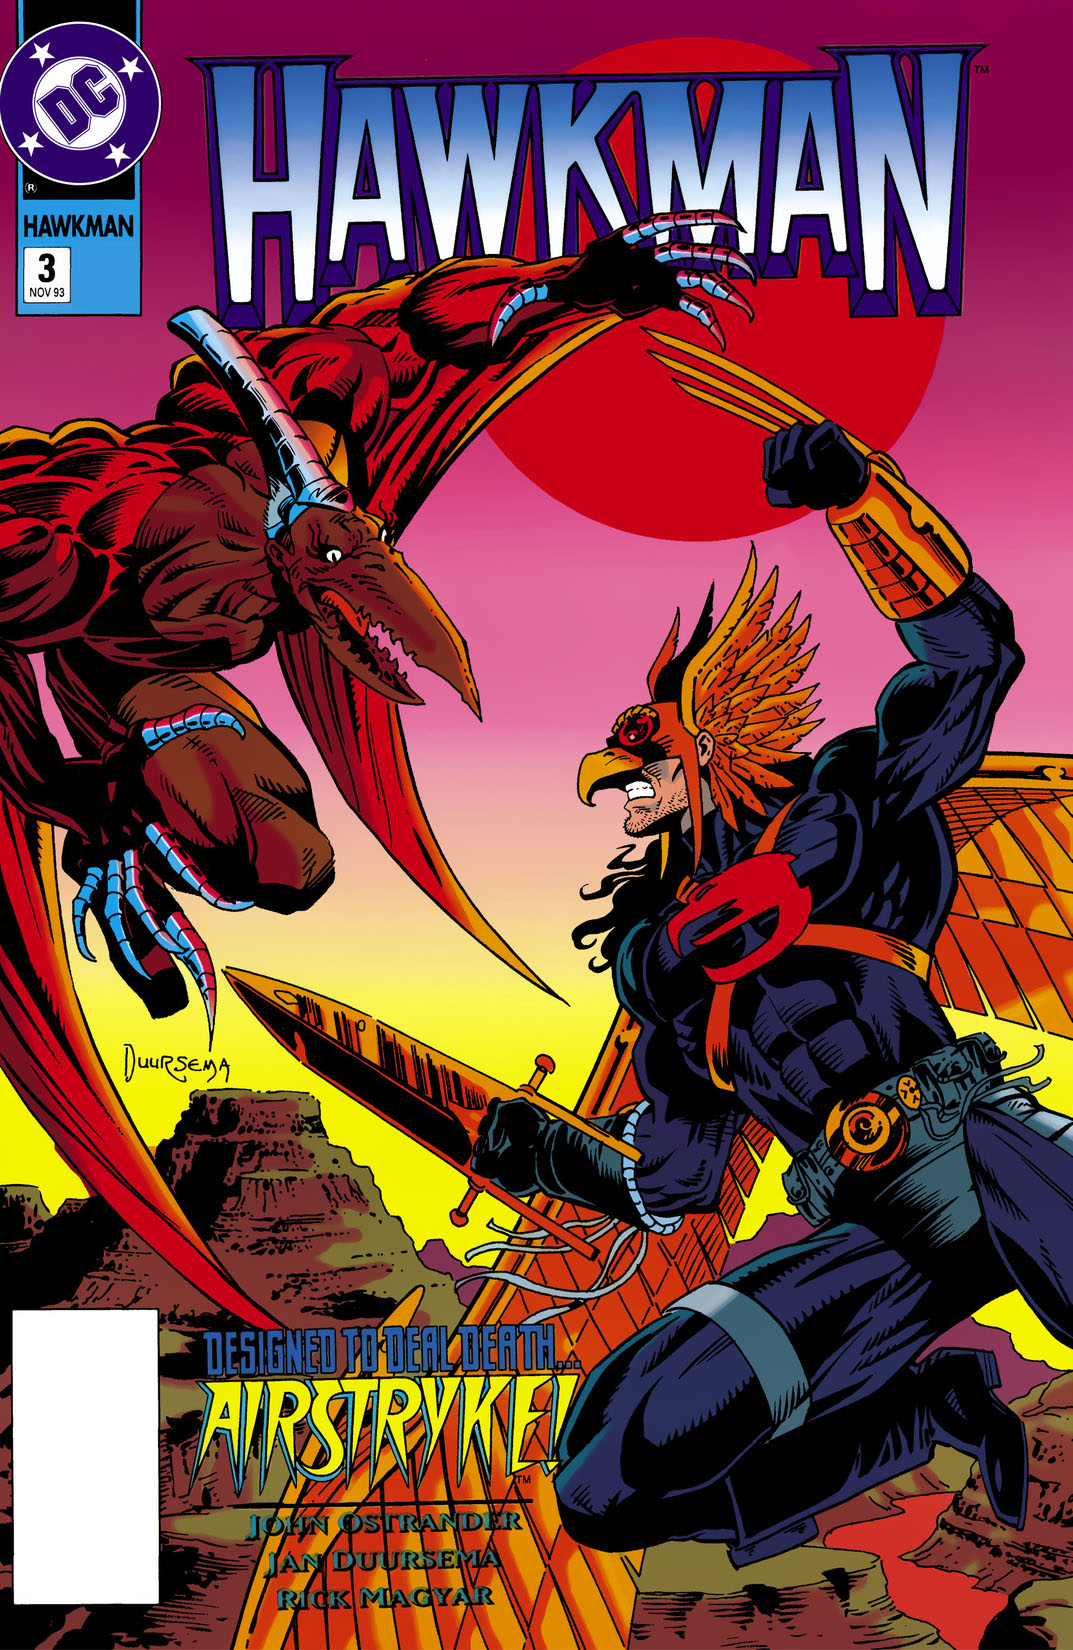 Hawkman (1993-) #3 preview images